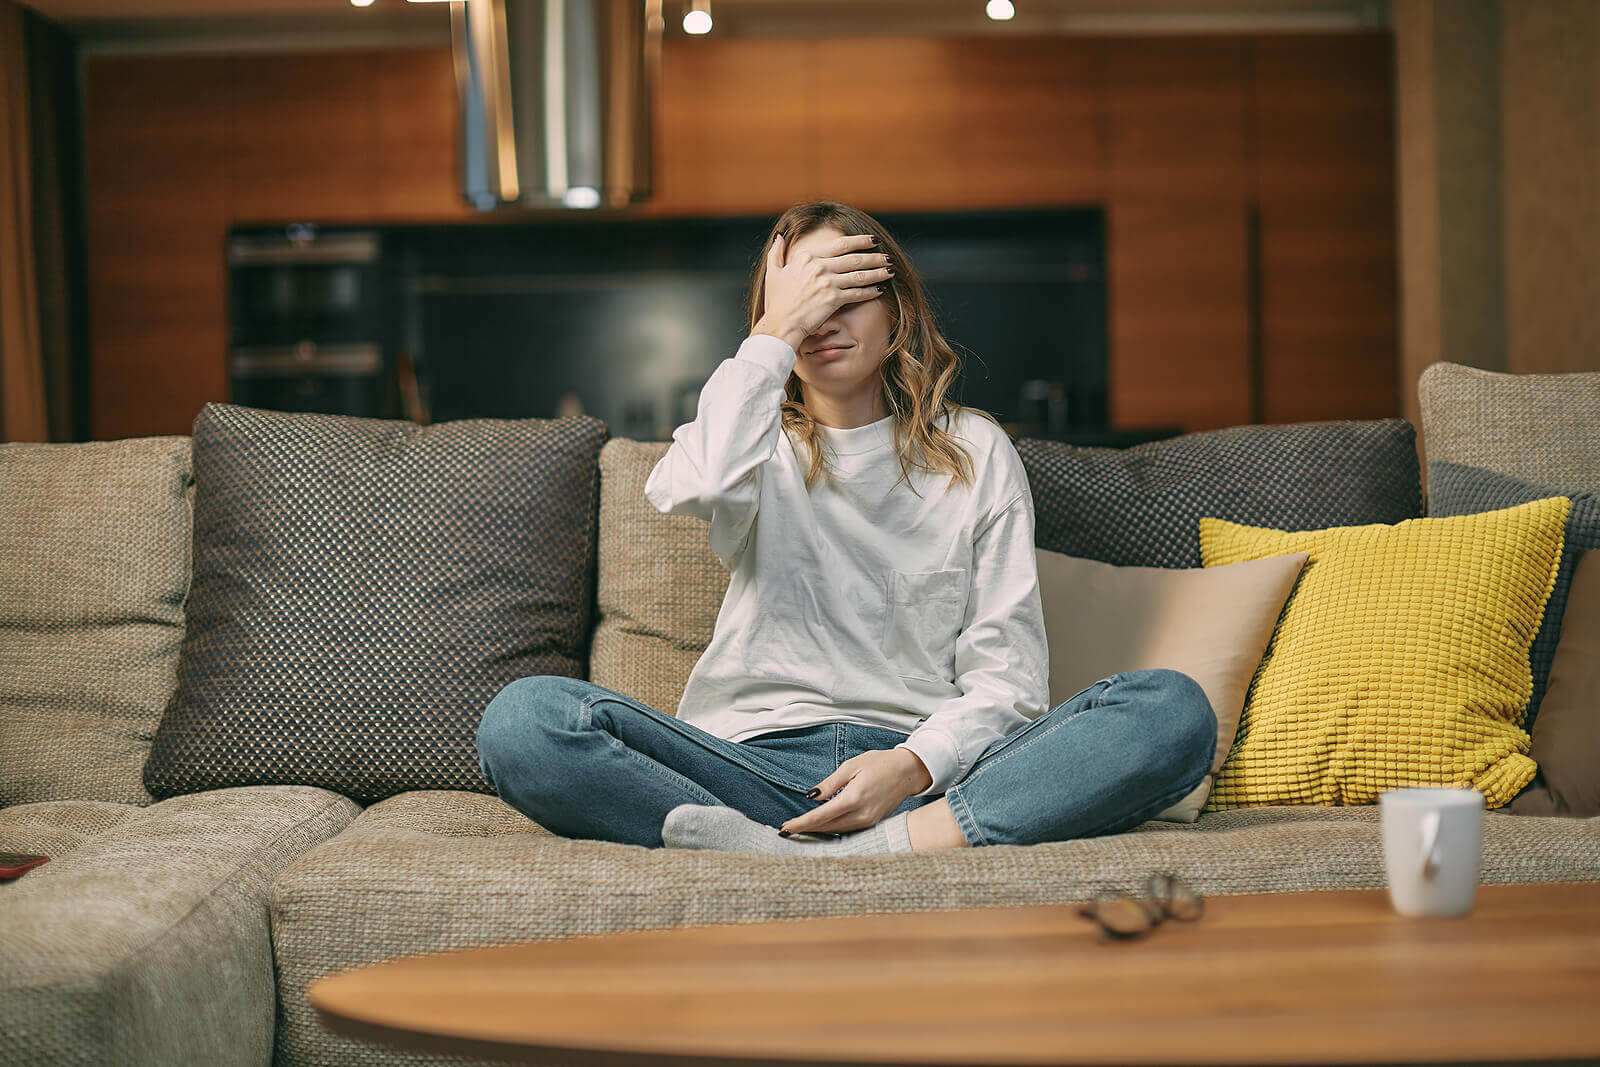 Photo of a young woman sitting on a couch with her hand on her forehead looking upset. Are you feeling lonely and hopeless? Learn how depression treatment in Georgia can help you manage your symtpoms.